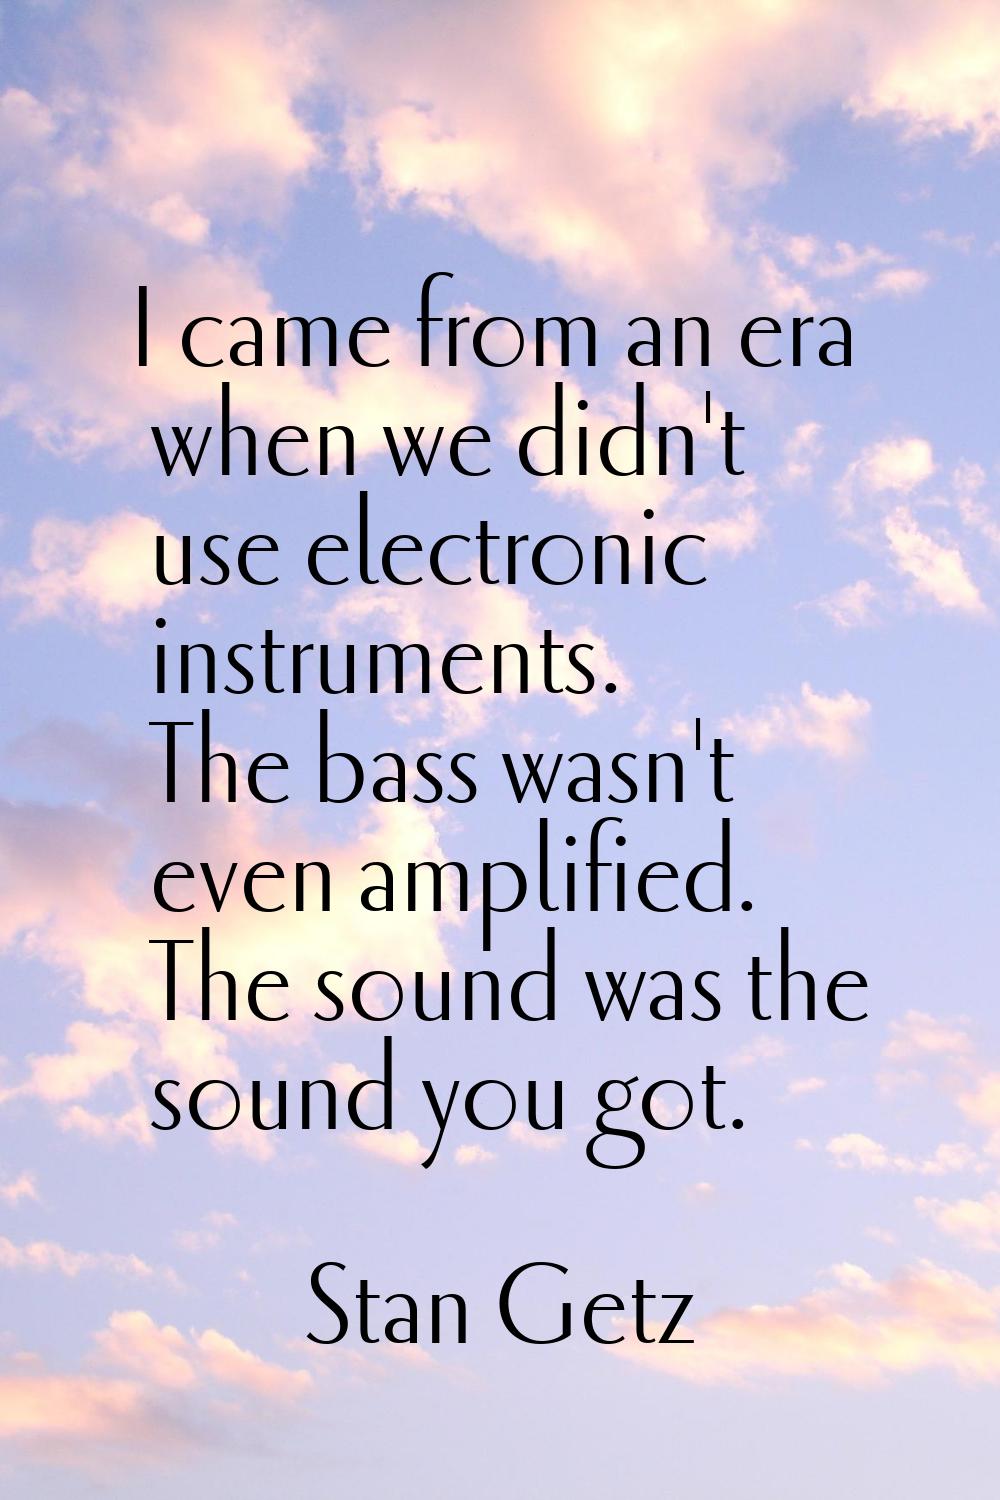 I came from an era when we didn't use electronic instruments. The bass wasn't even amplified. The s